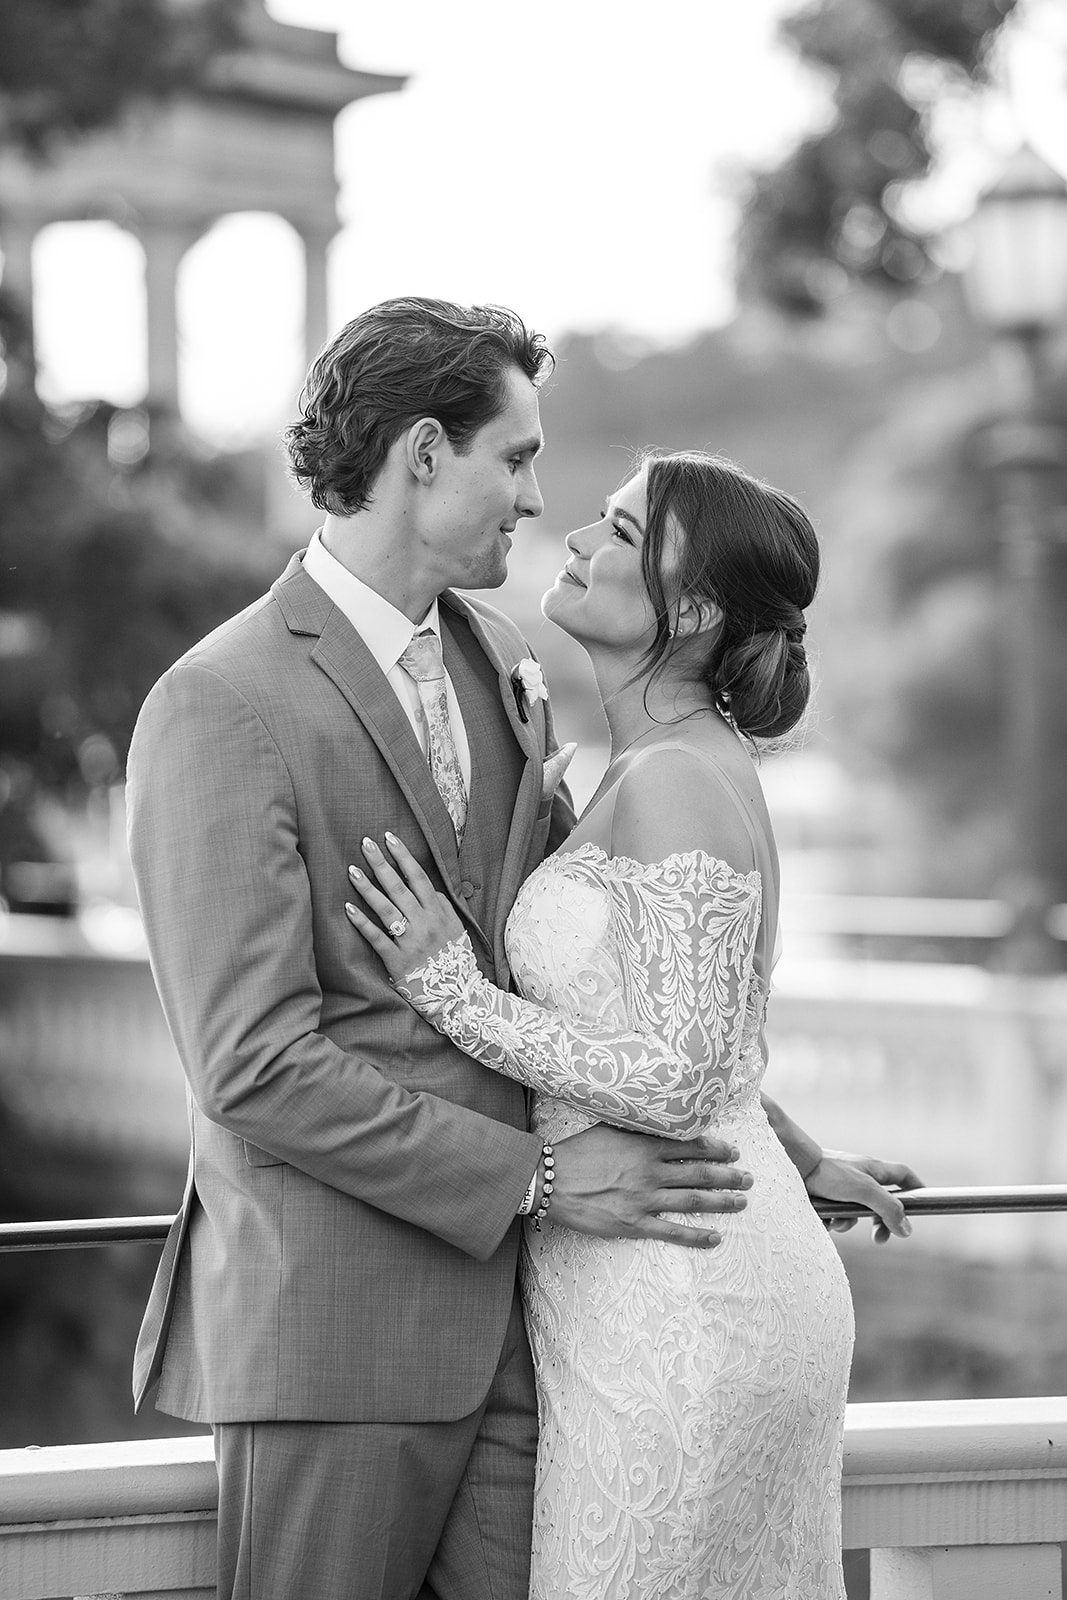 Black and white portraits of the bride and groom at Water works in Philadelphia 